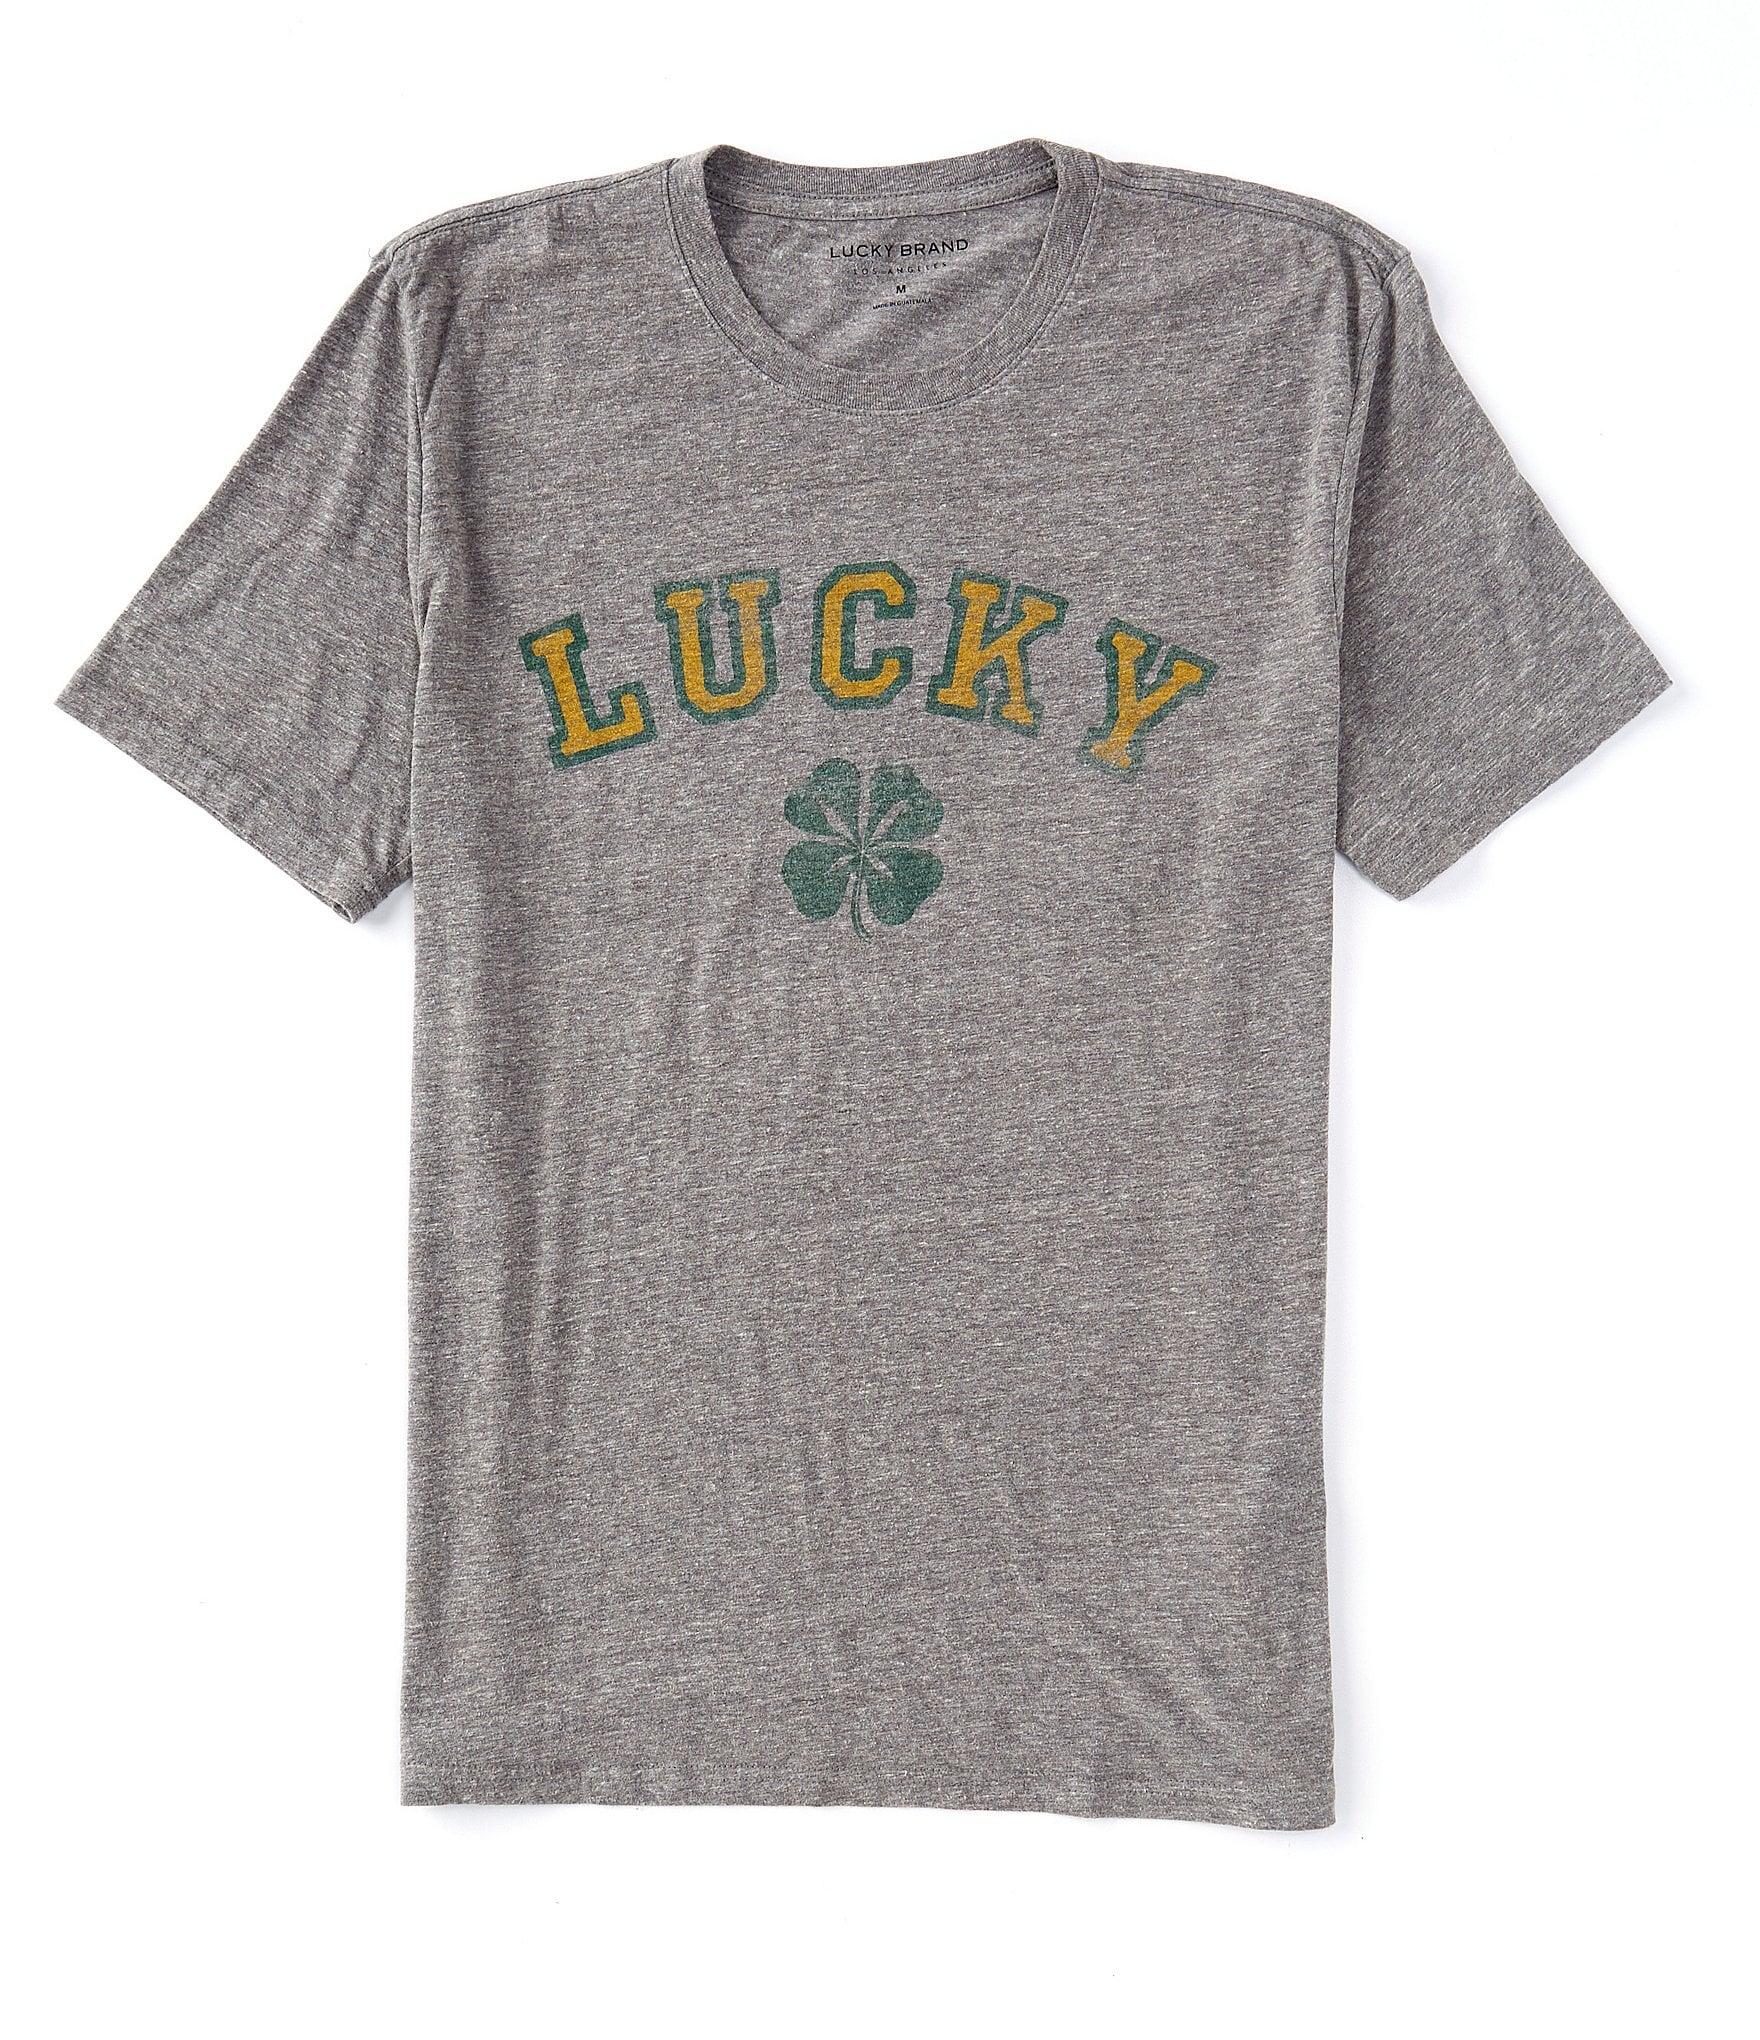 The Lucky T Brand